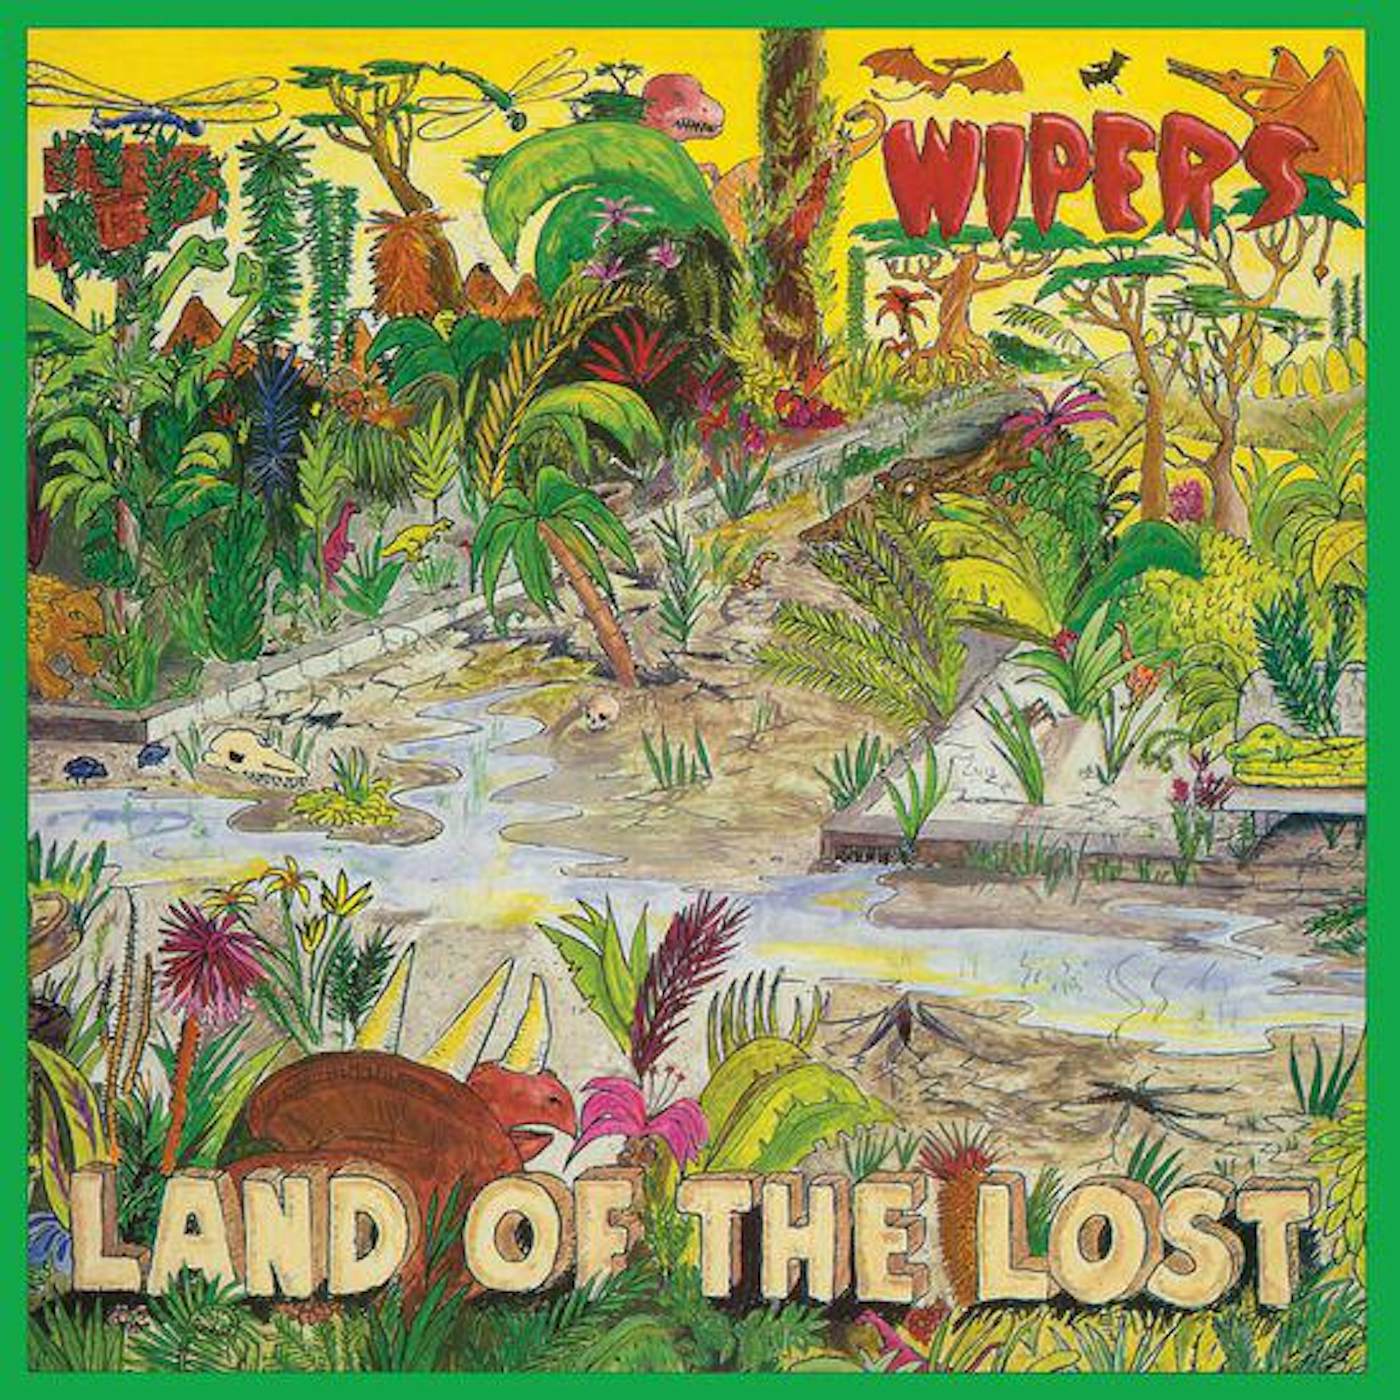 Wipers Land Of The Lost (color vinyl)